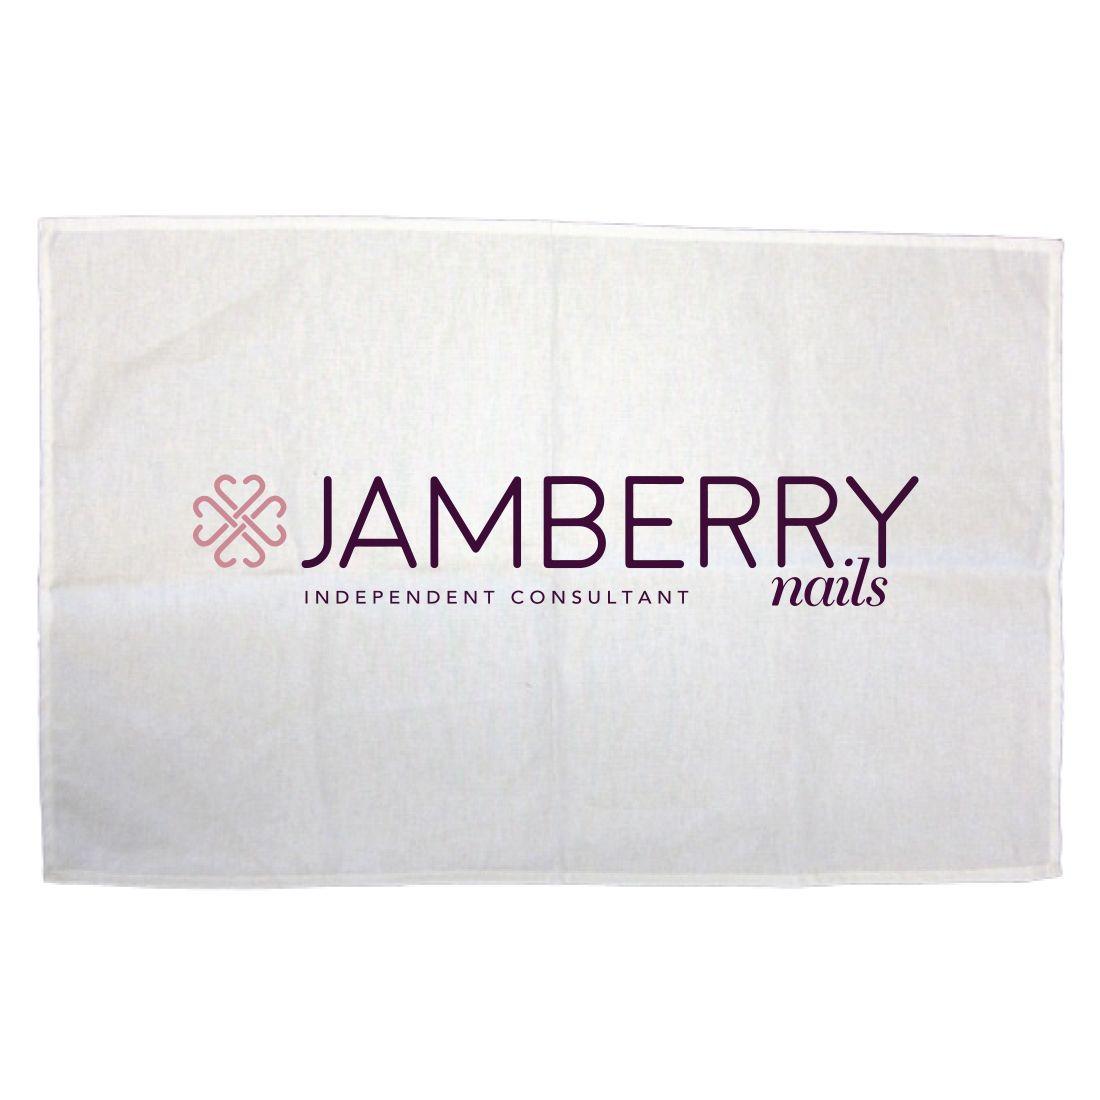 Jamberry Black and White Logo - Jamberry Logo Independent Consultant Tea Towel